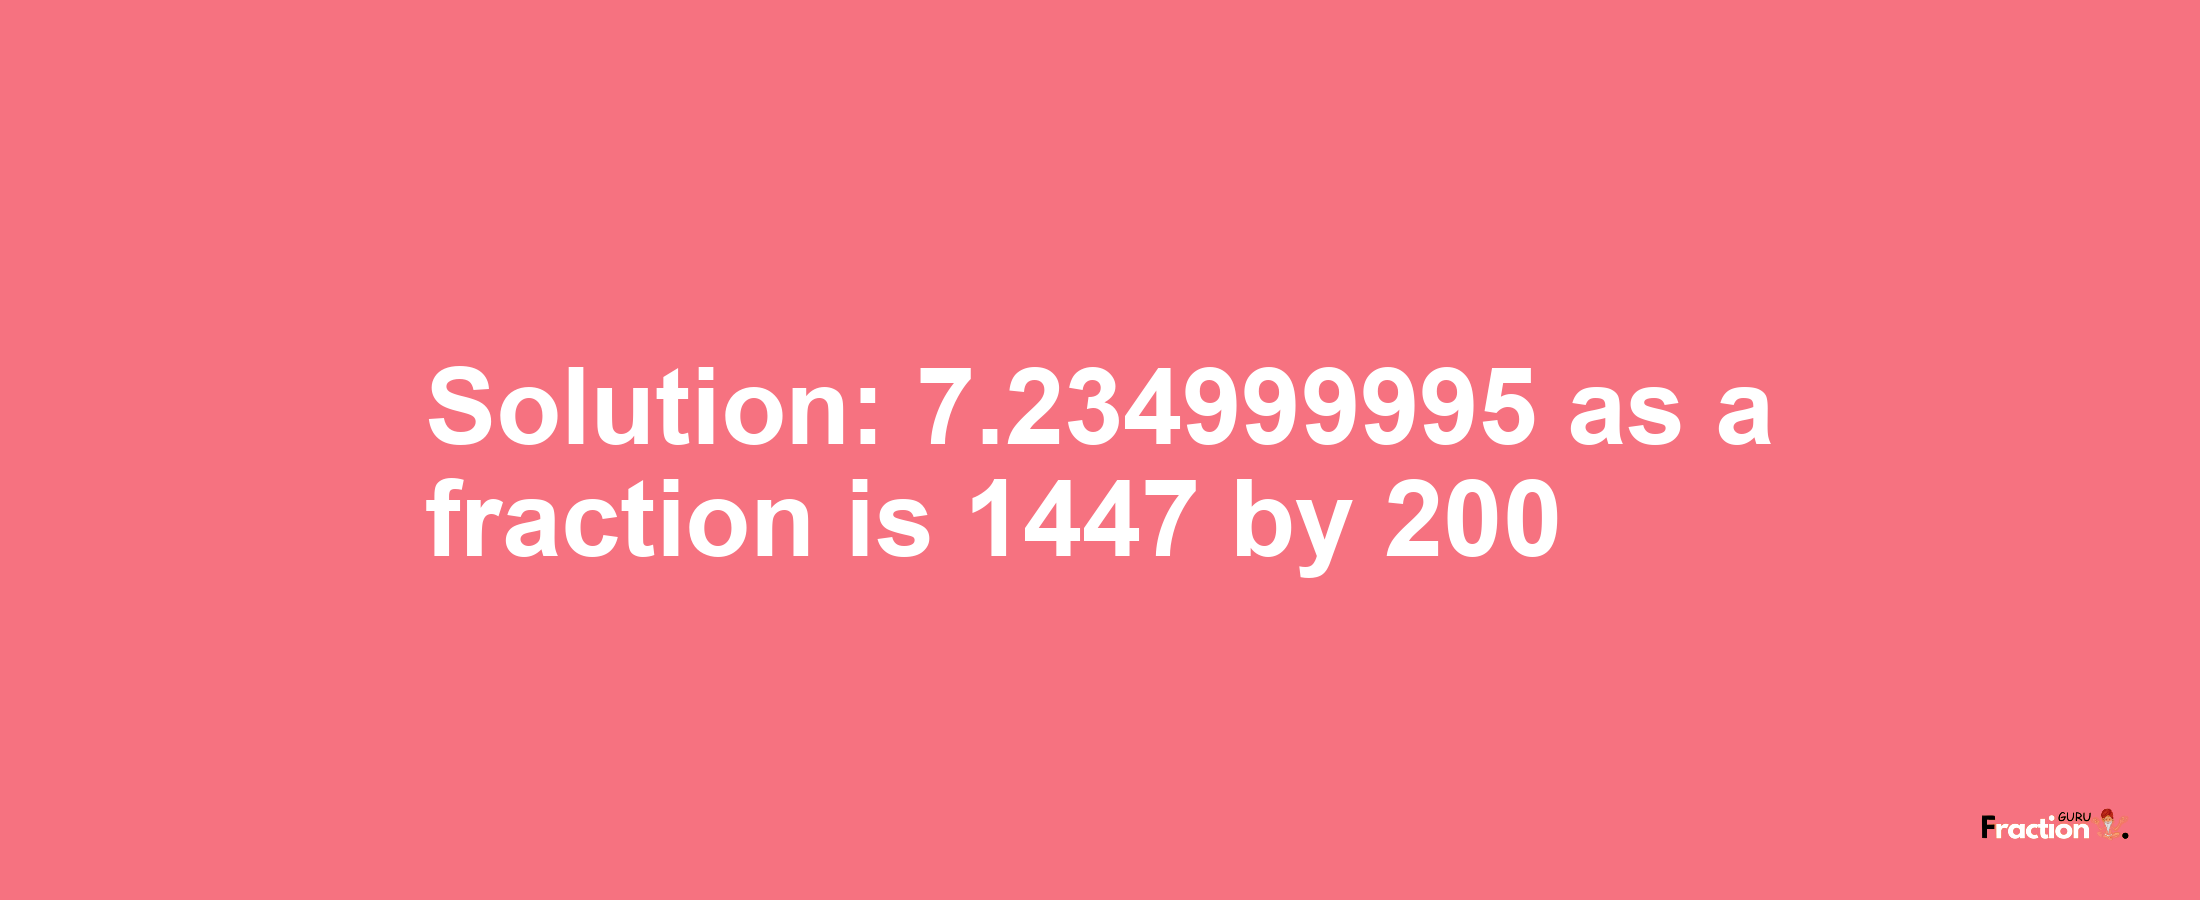 Solution:7.234999995 as a fraction is 1447/200